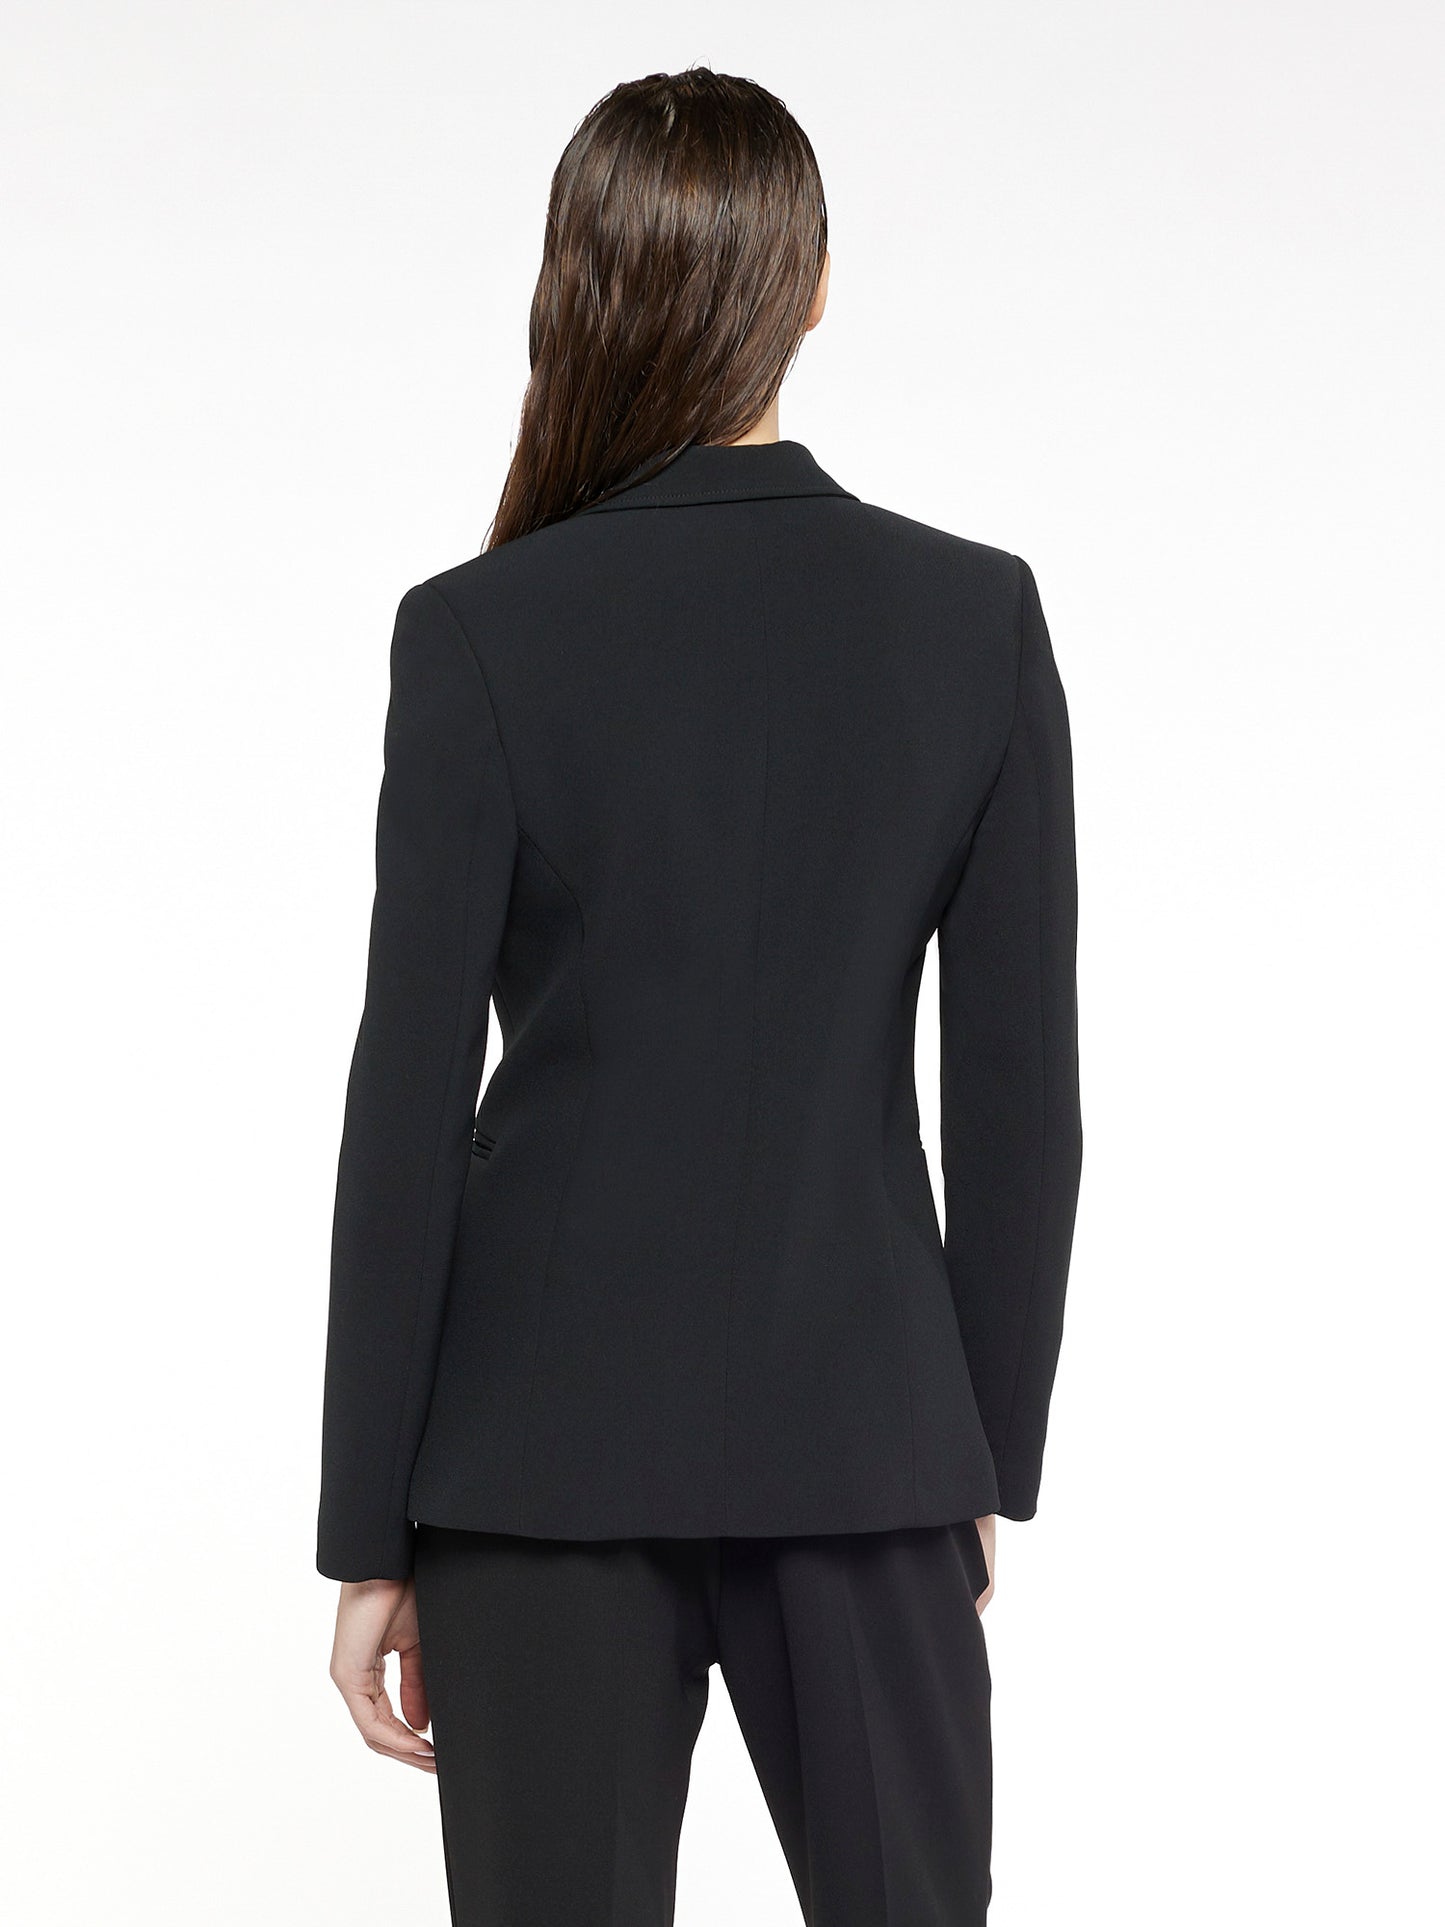 One button ultra-fitted jacket